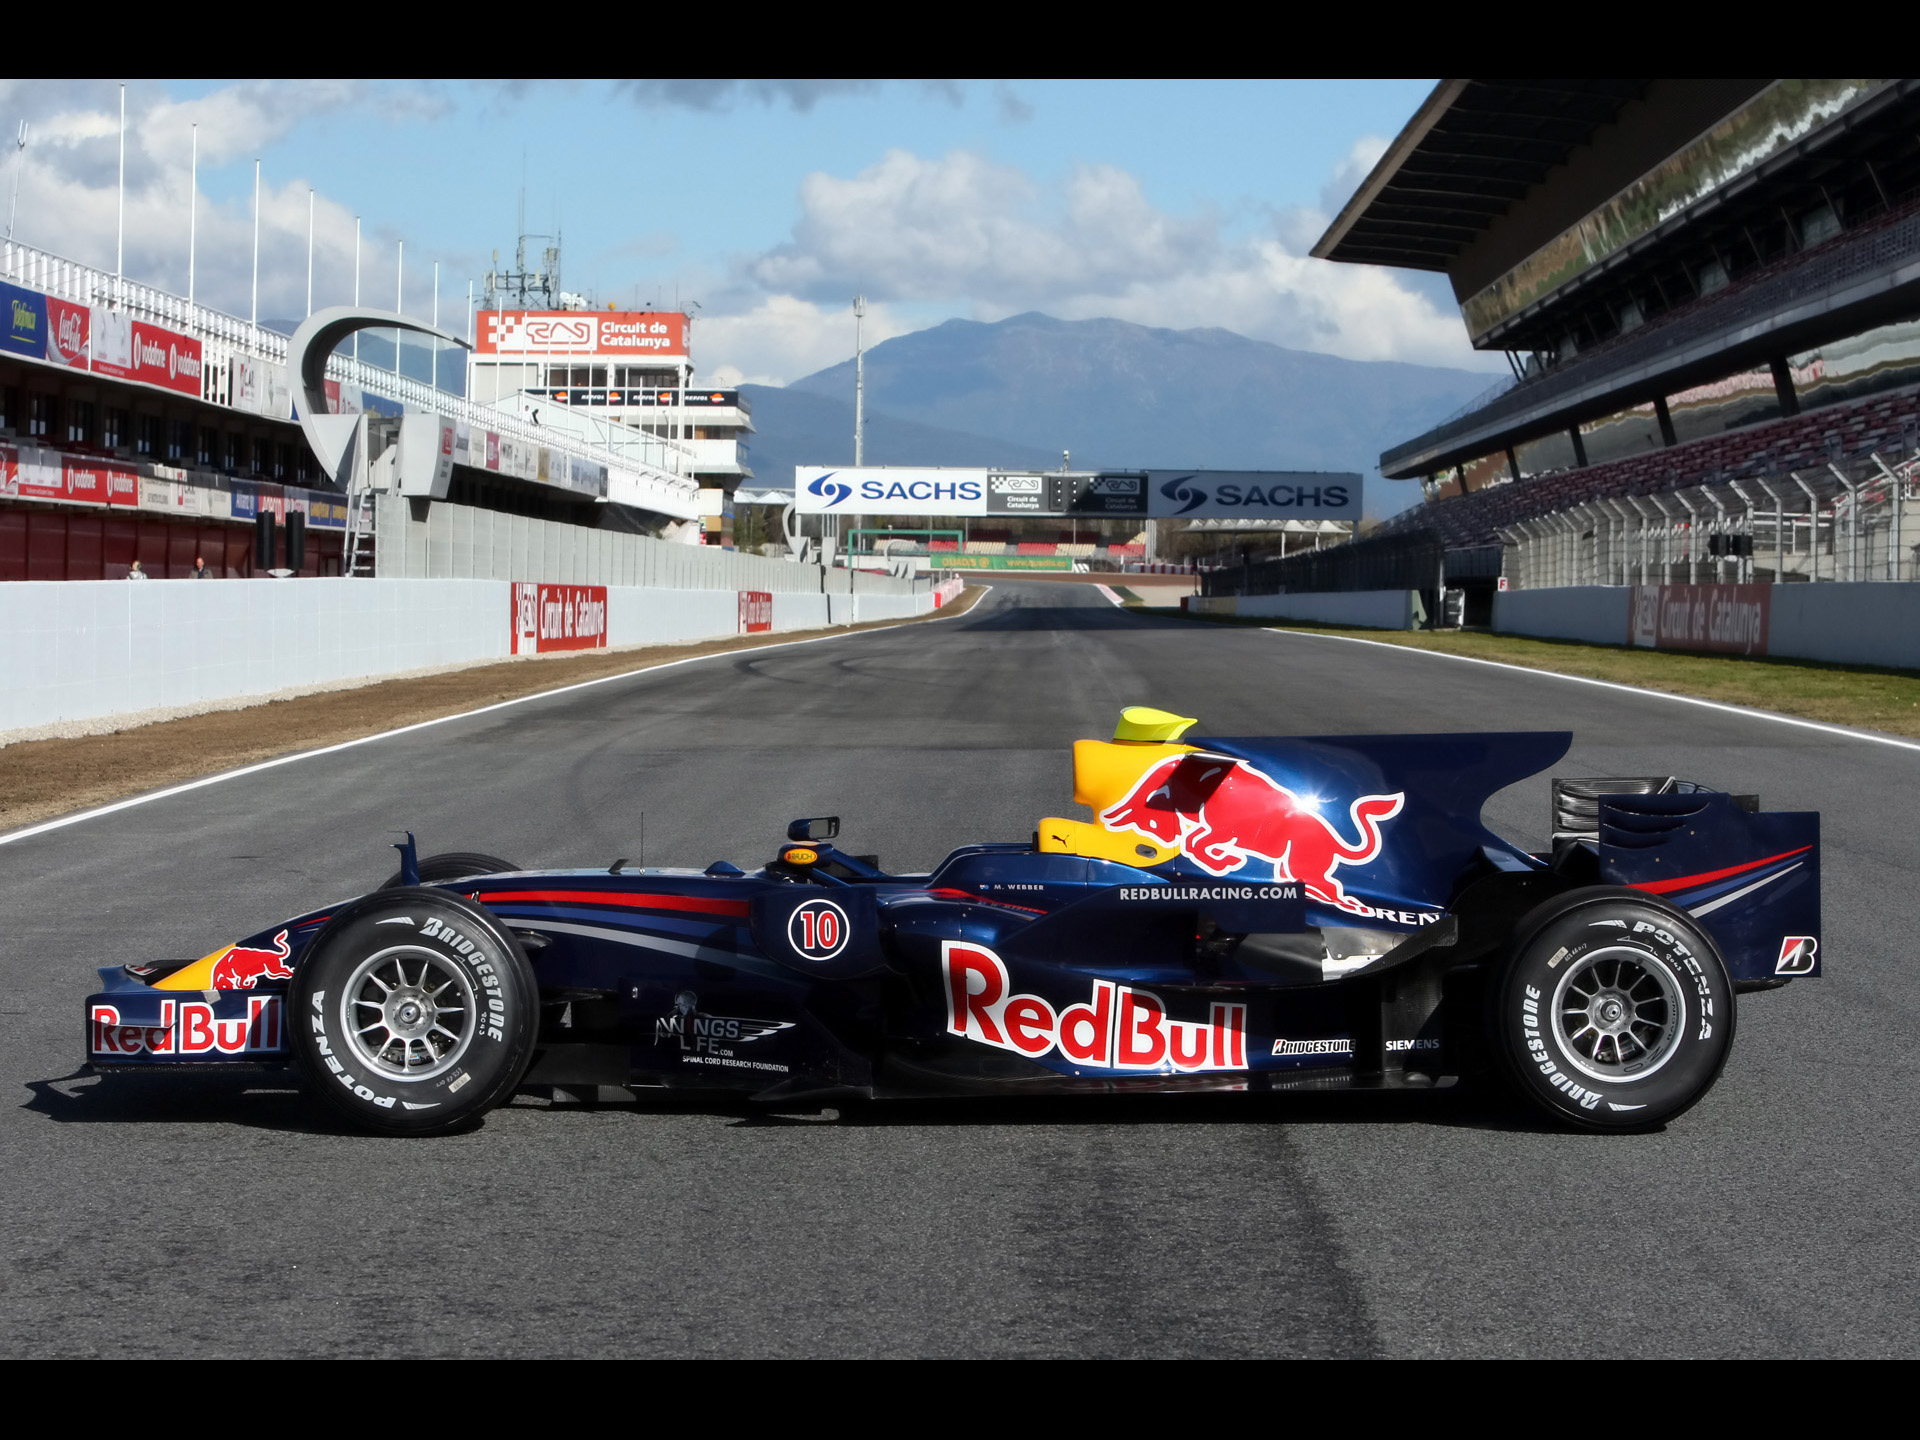 red-bull-rb4-view-download-wallpaper-1920x1440-comments_f5e8c.jpg